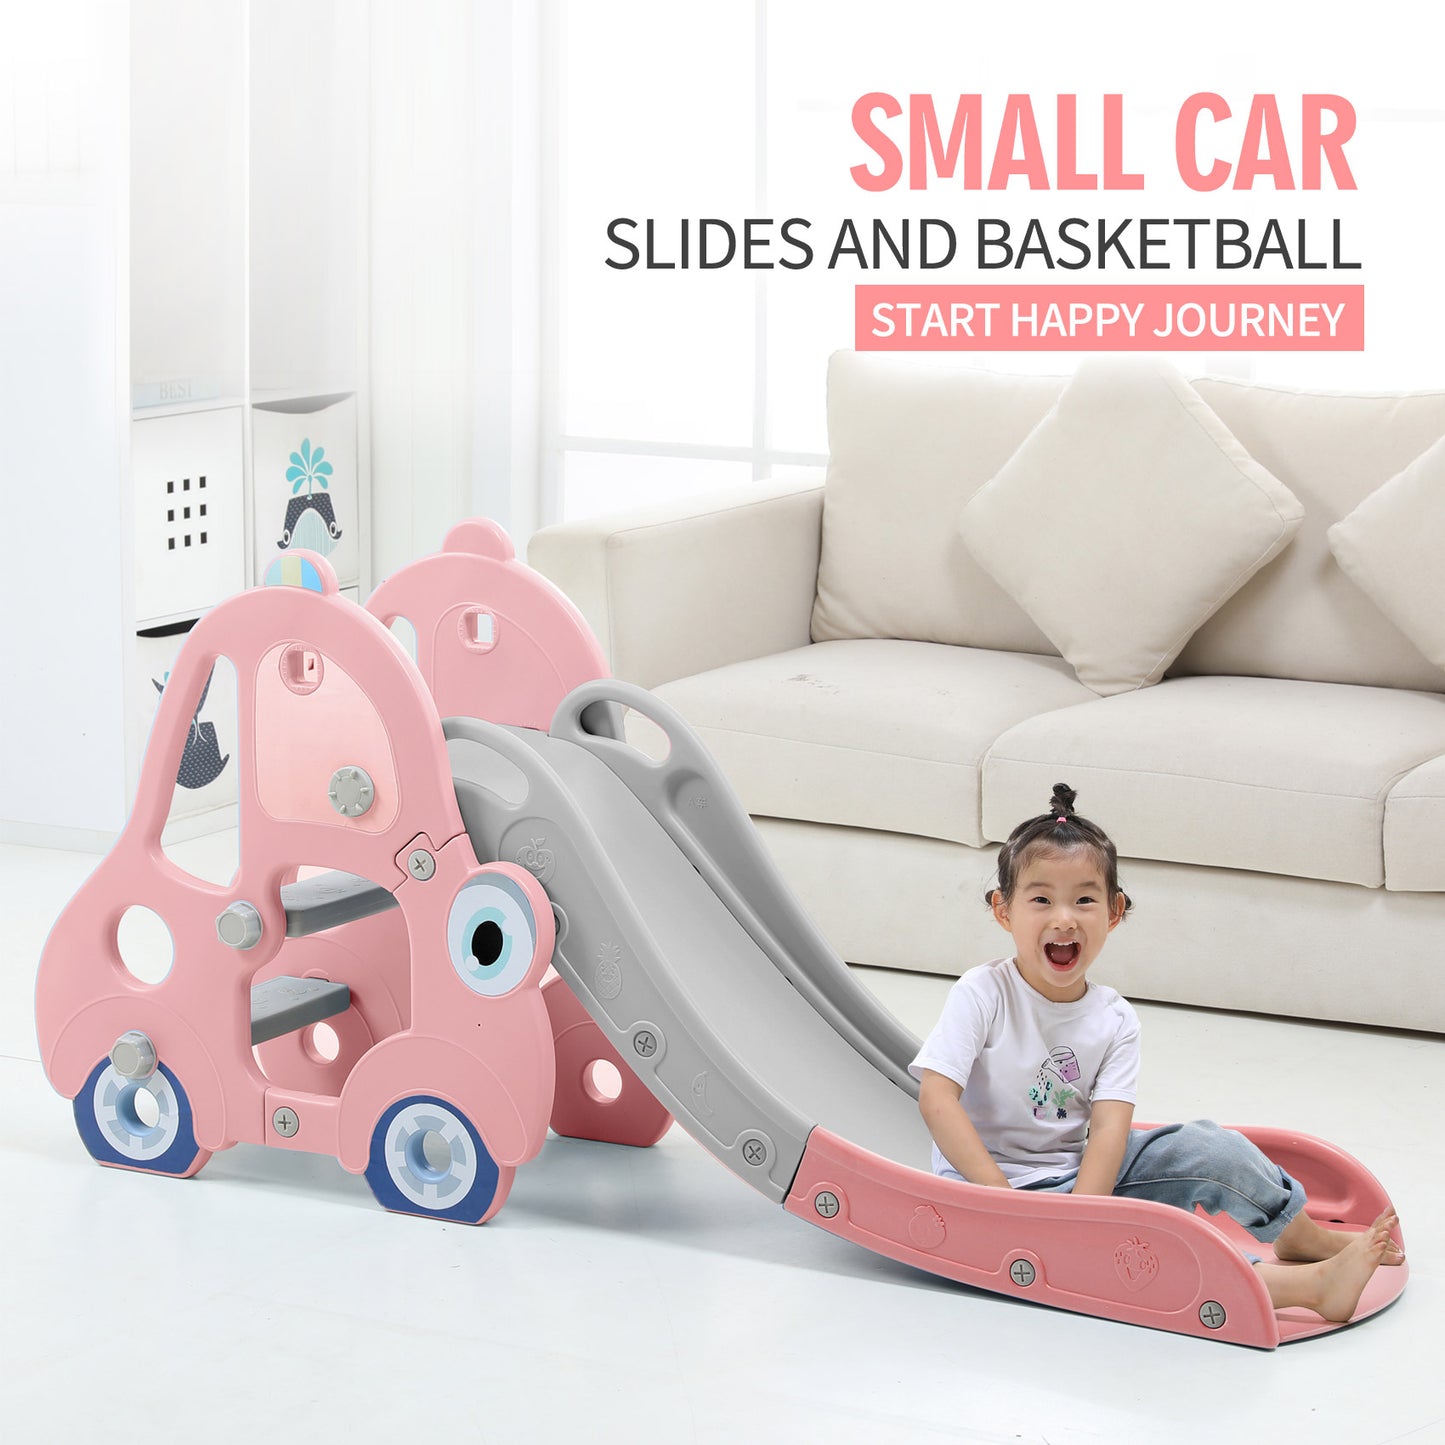 UNICOO – Toddler Car Slide, Kids Large Play Climber Slide Play Set with Extra Long Slipping Slope, Basketball Hoop and Ball, Ideal Gift for Boys and Girls Indoor Outdoor Use